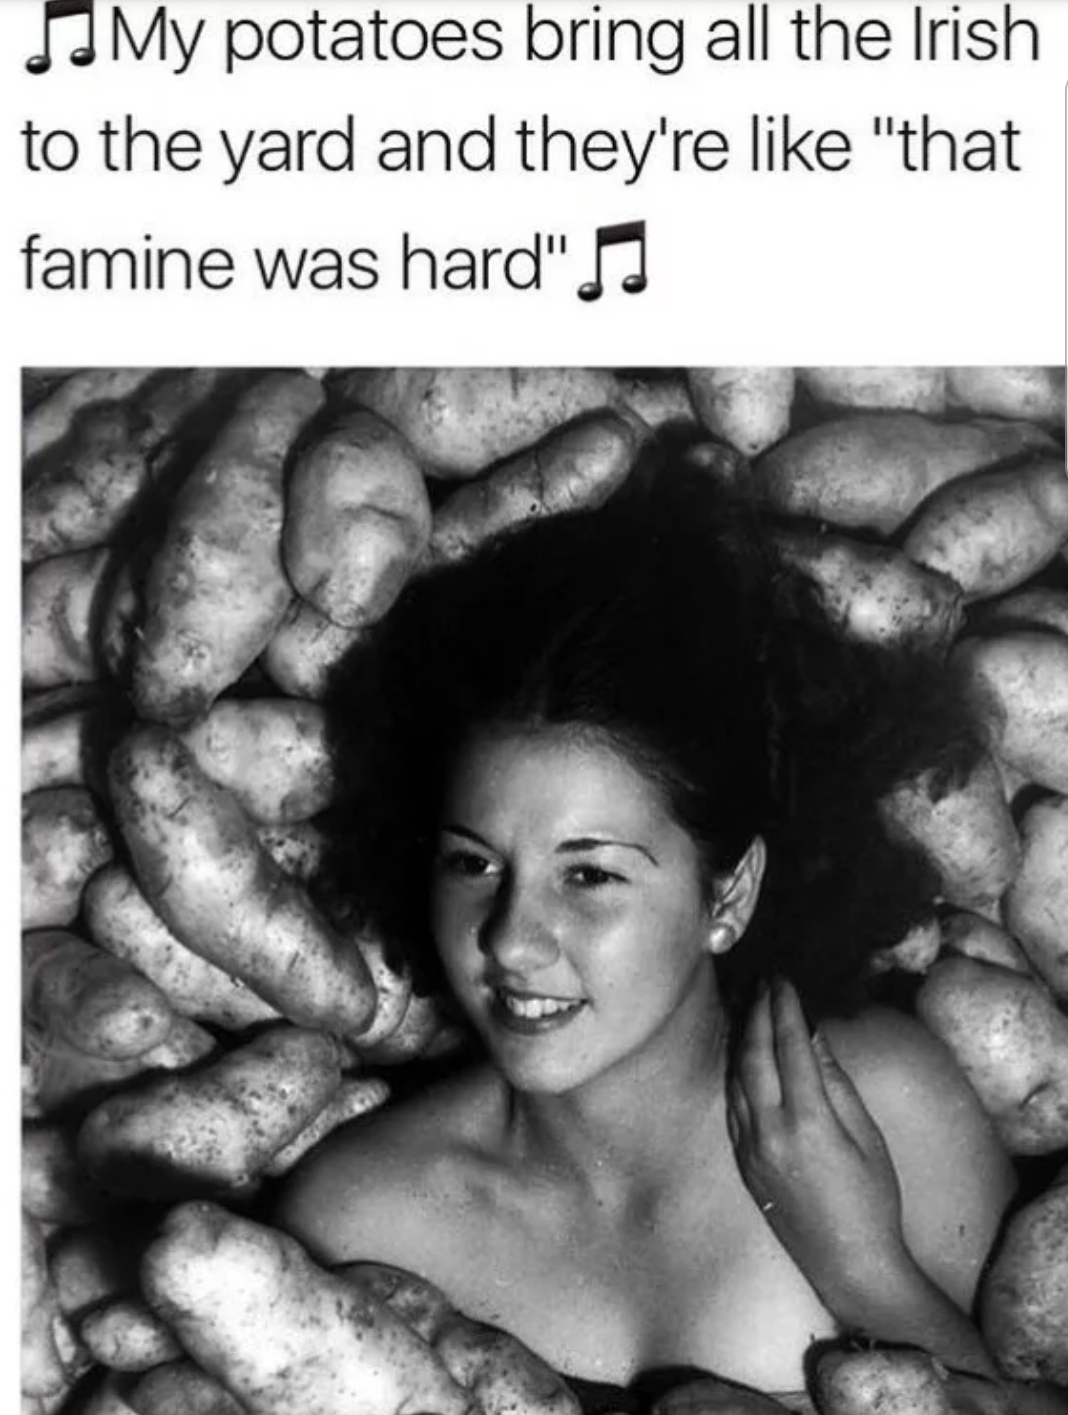 miss idaho 1935 - Jj My potatoes bring all the Irish to the yard and they're "that famine was hard",